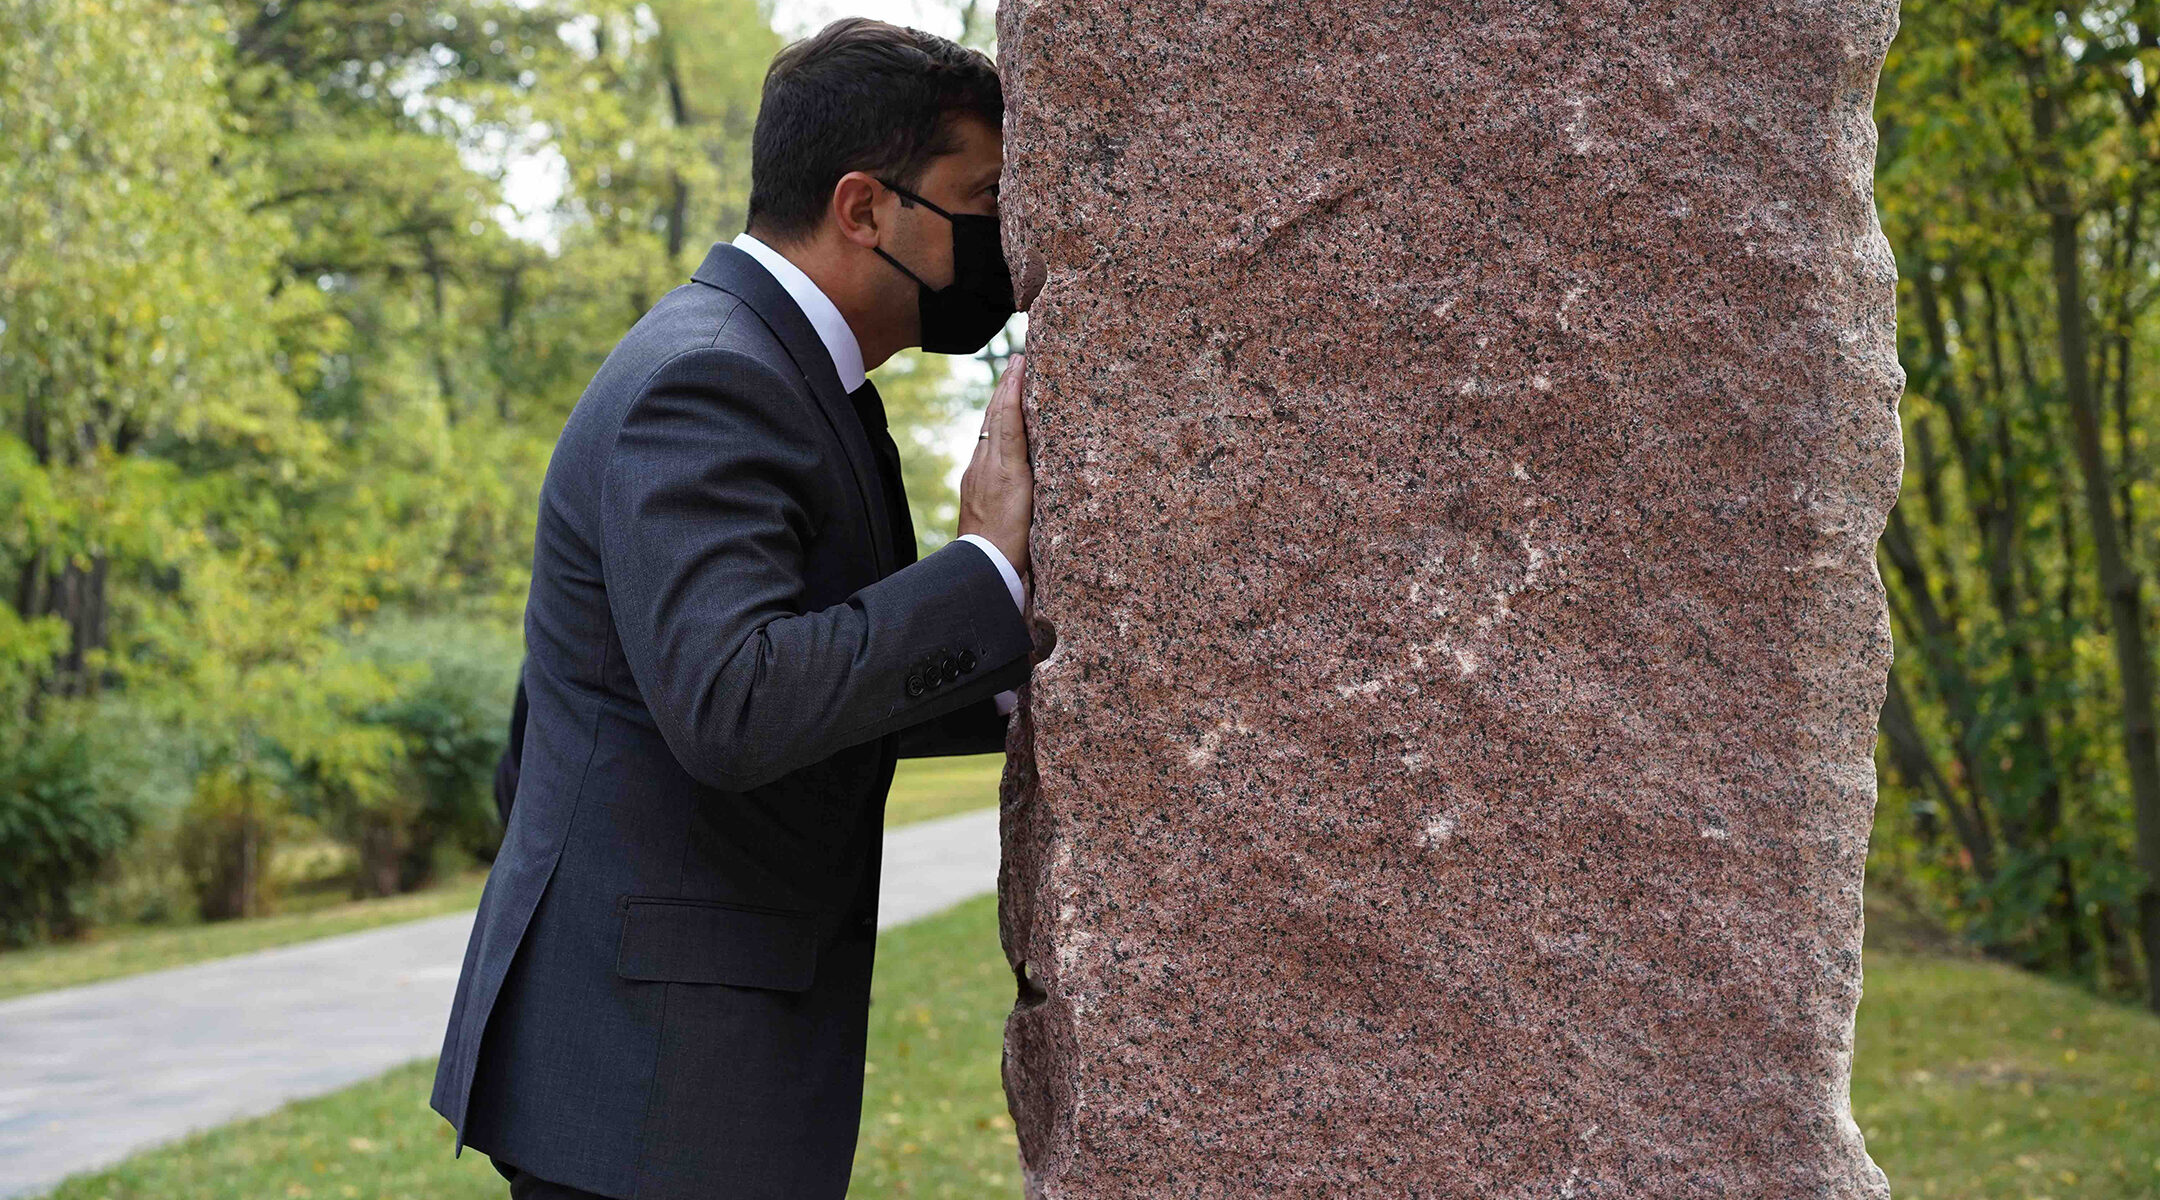 Ukrainian President Volodymyr Zelensky commemorates Holocaust victims at the at the Babyn Yar Holocaust Memorial Center in Kyiv, Ukraine in April 2021. (Courtesy of the Babyn Yar Holocaust Memorial Center.)